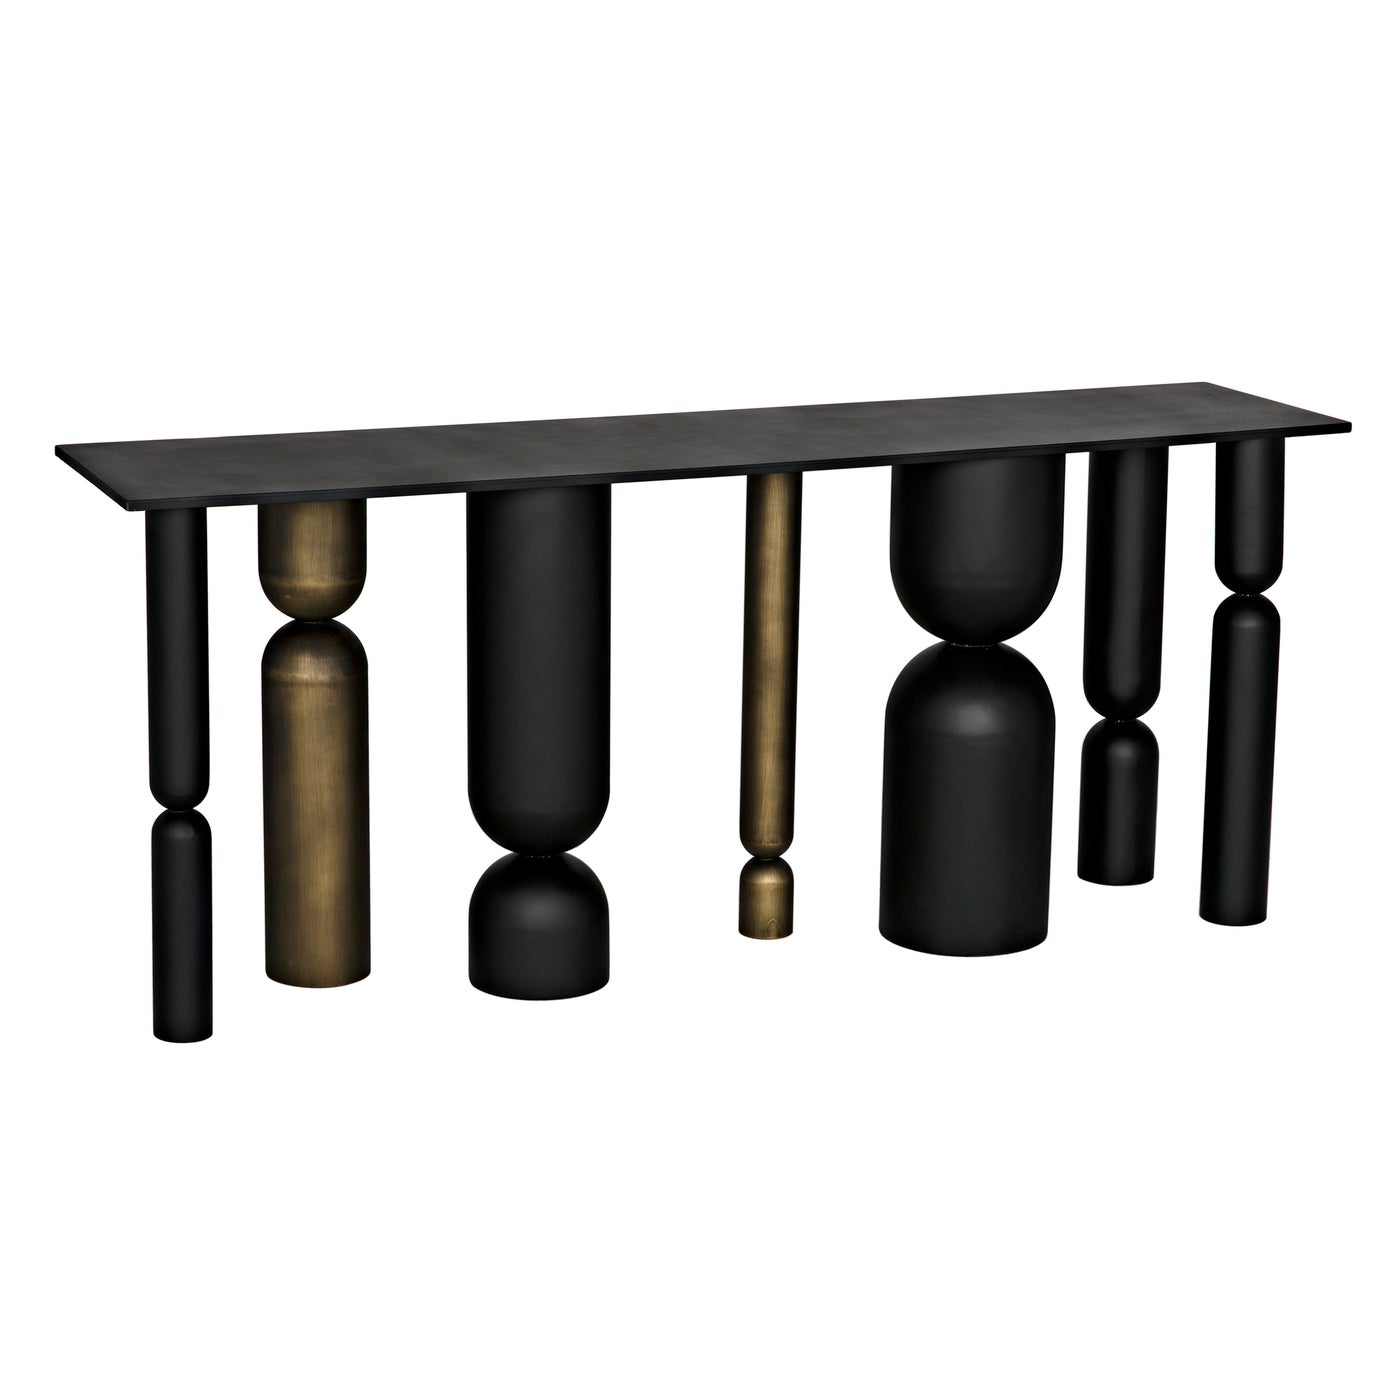 federation Glow for me Figaro Console, Black Metal and Aged Brass Finish - search | Noir Trading,  Inc.